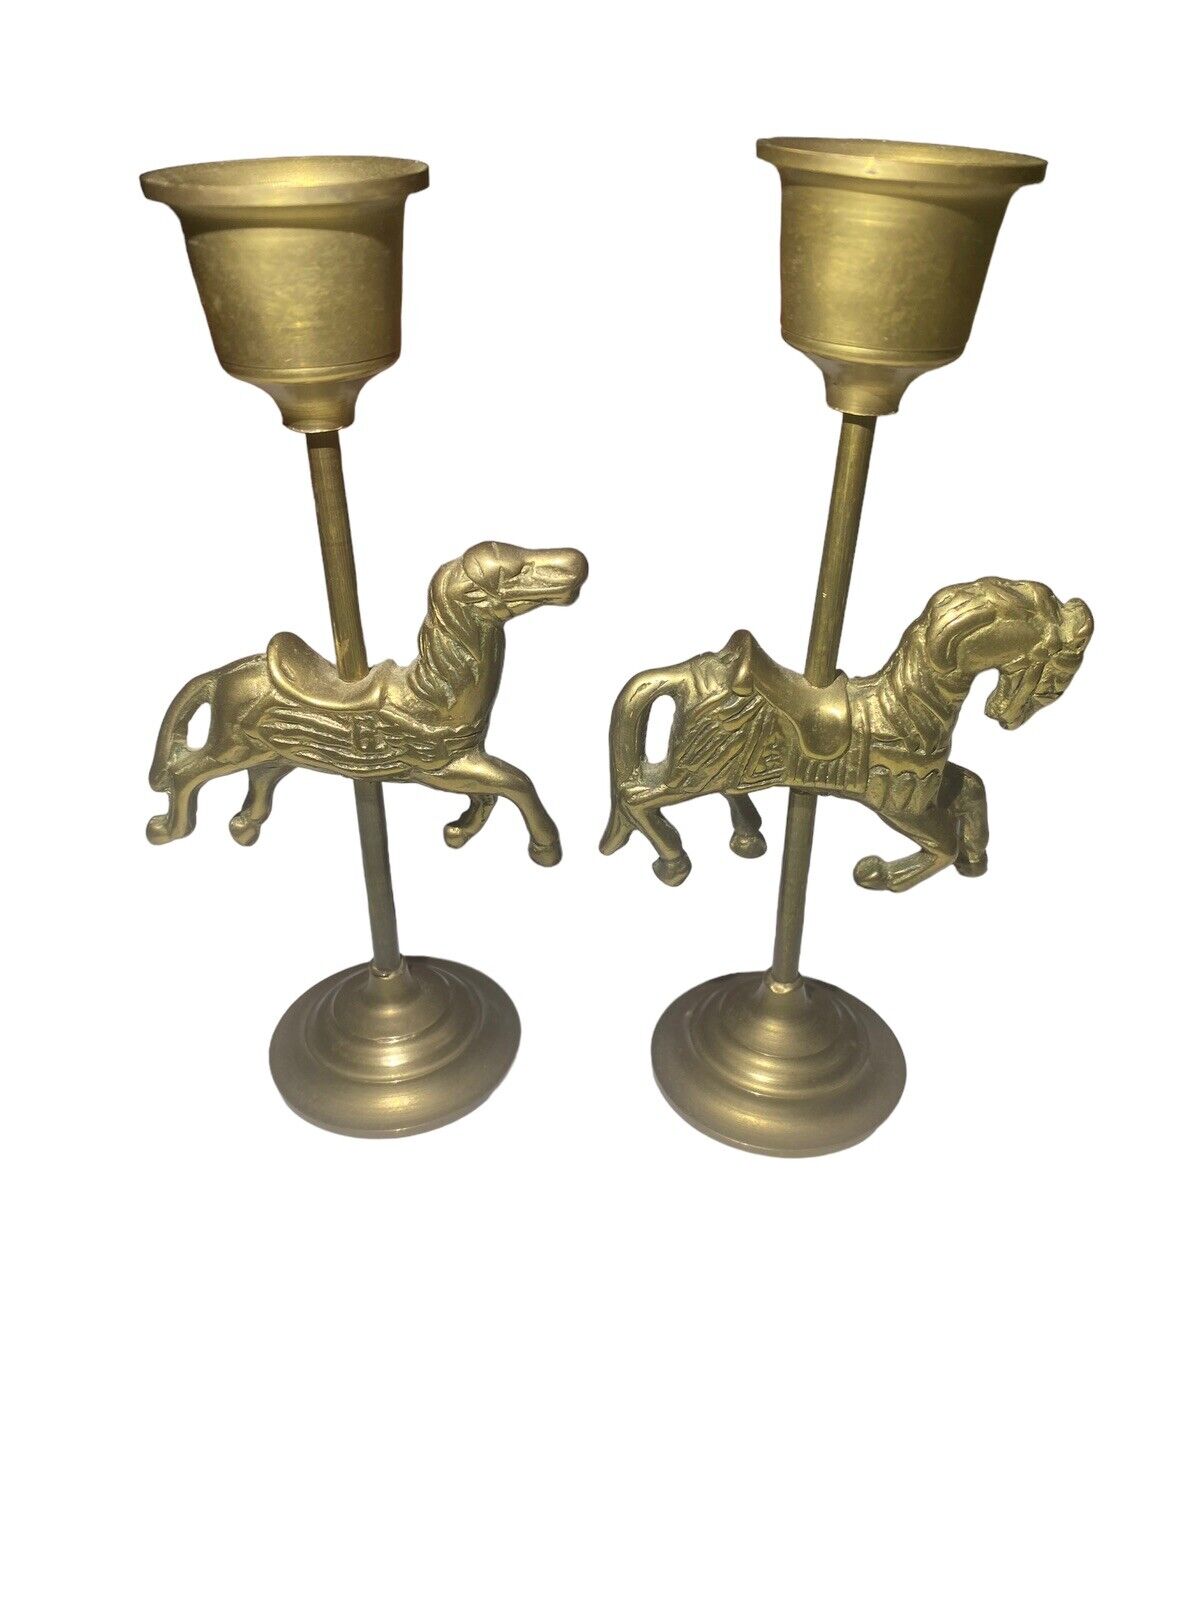 Pair of 5” Tall Solid Brass Carousel Horse Candle Holders Vintage